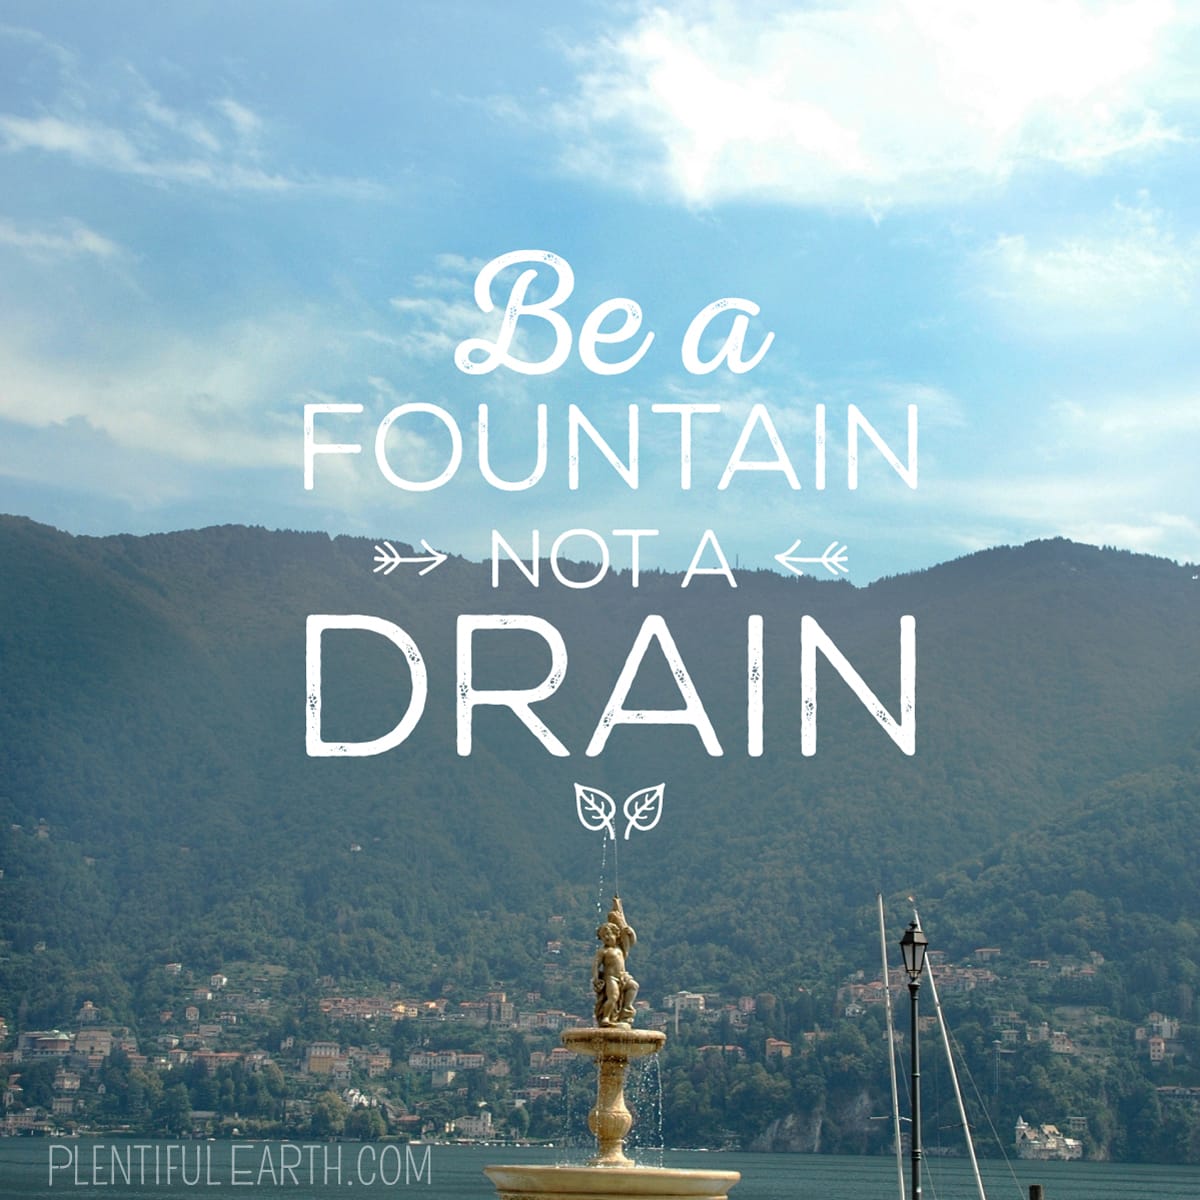 Be a fountain, not a drain" superimposed over a scenic view of a body of water with a witchy fountain in the foreground and mountains in the distance.